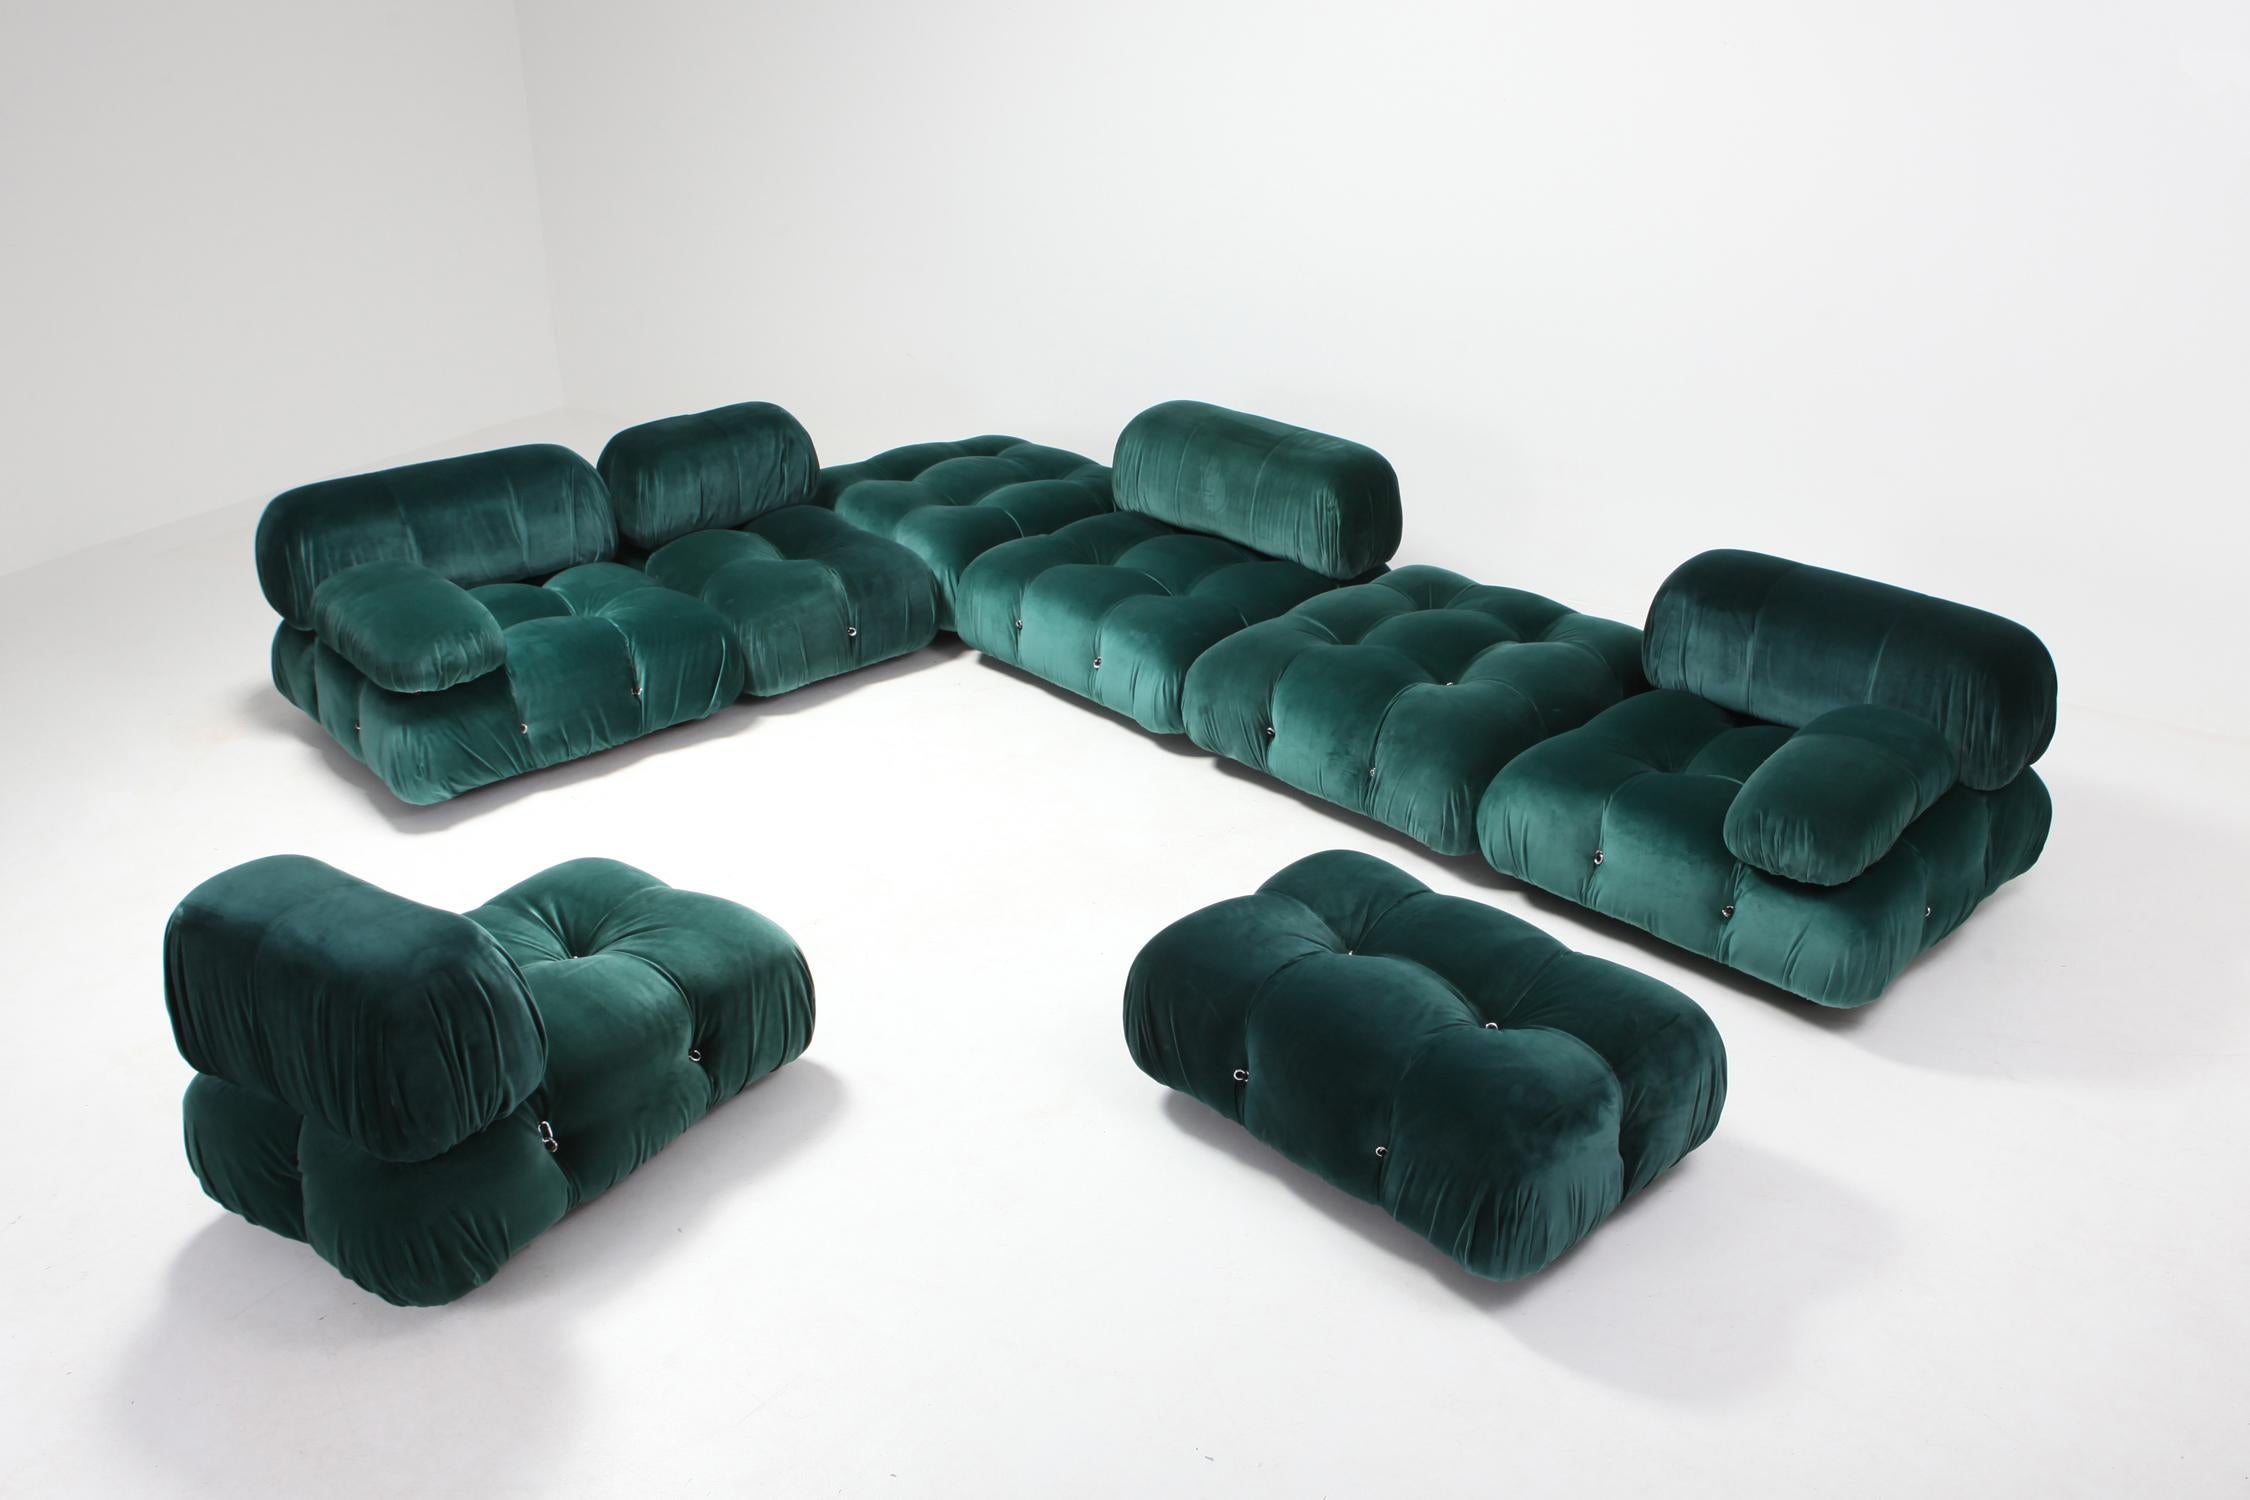 Mario Bellini designed this modular sectional sofa for C&B Italia in the 1970s. This is a rare edition from before 1973 when C&B Italia became B&B Italia. Newly upholstered in green coloured cotton velvet. The entire sofa consists of 4 big seating